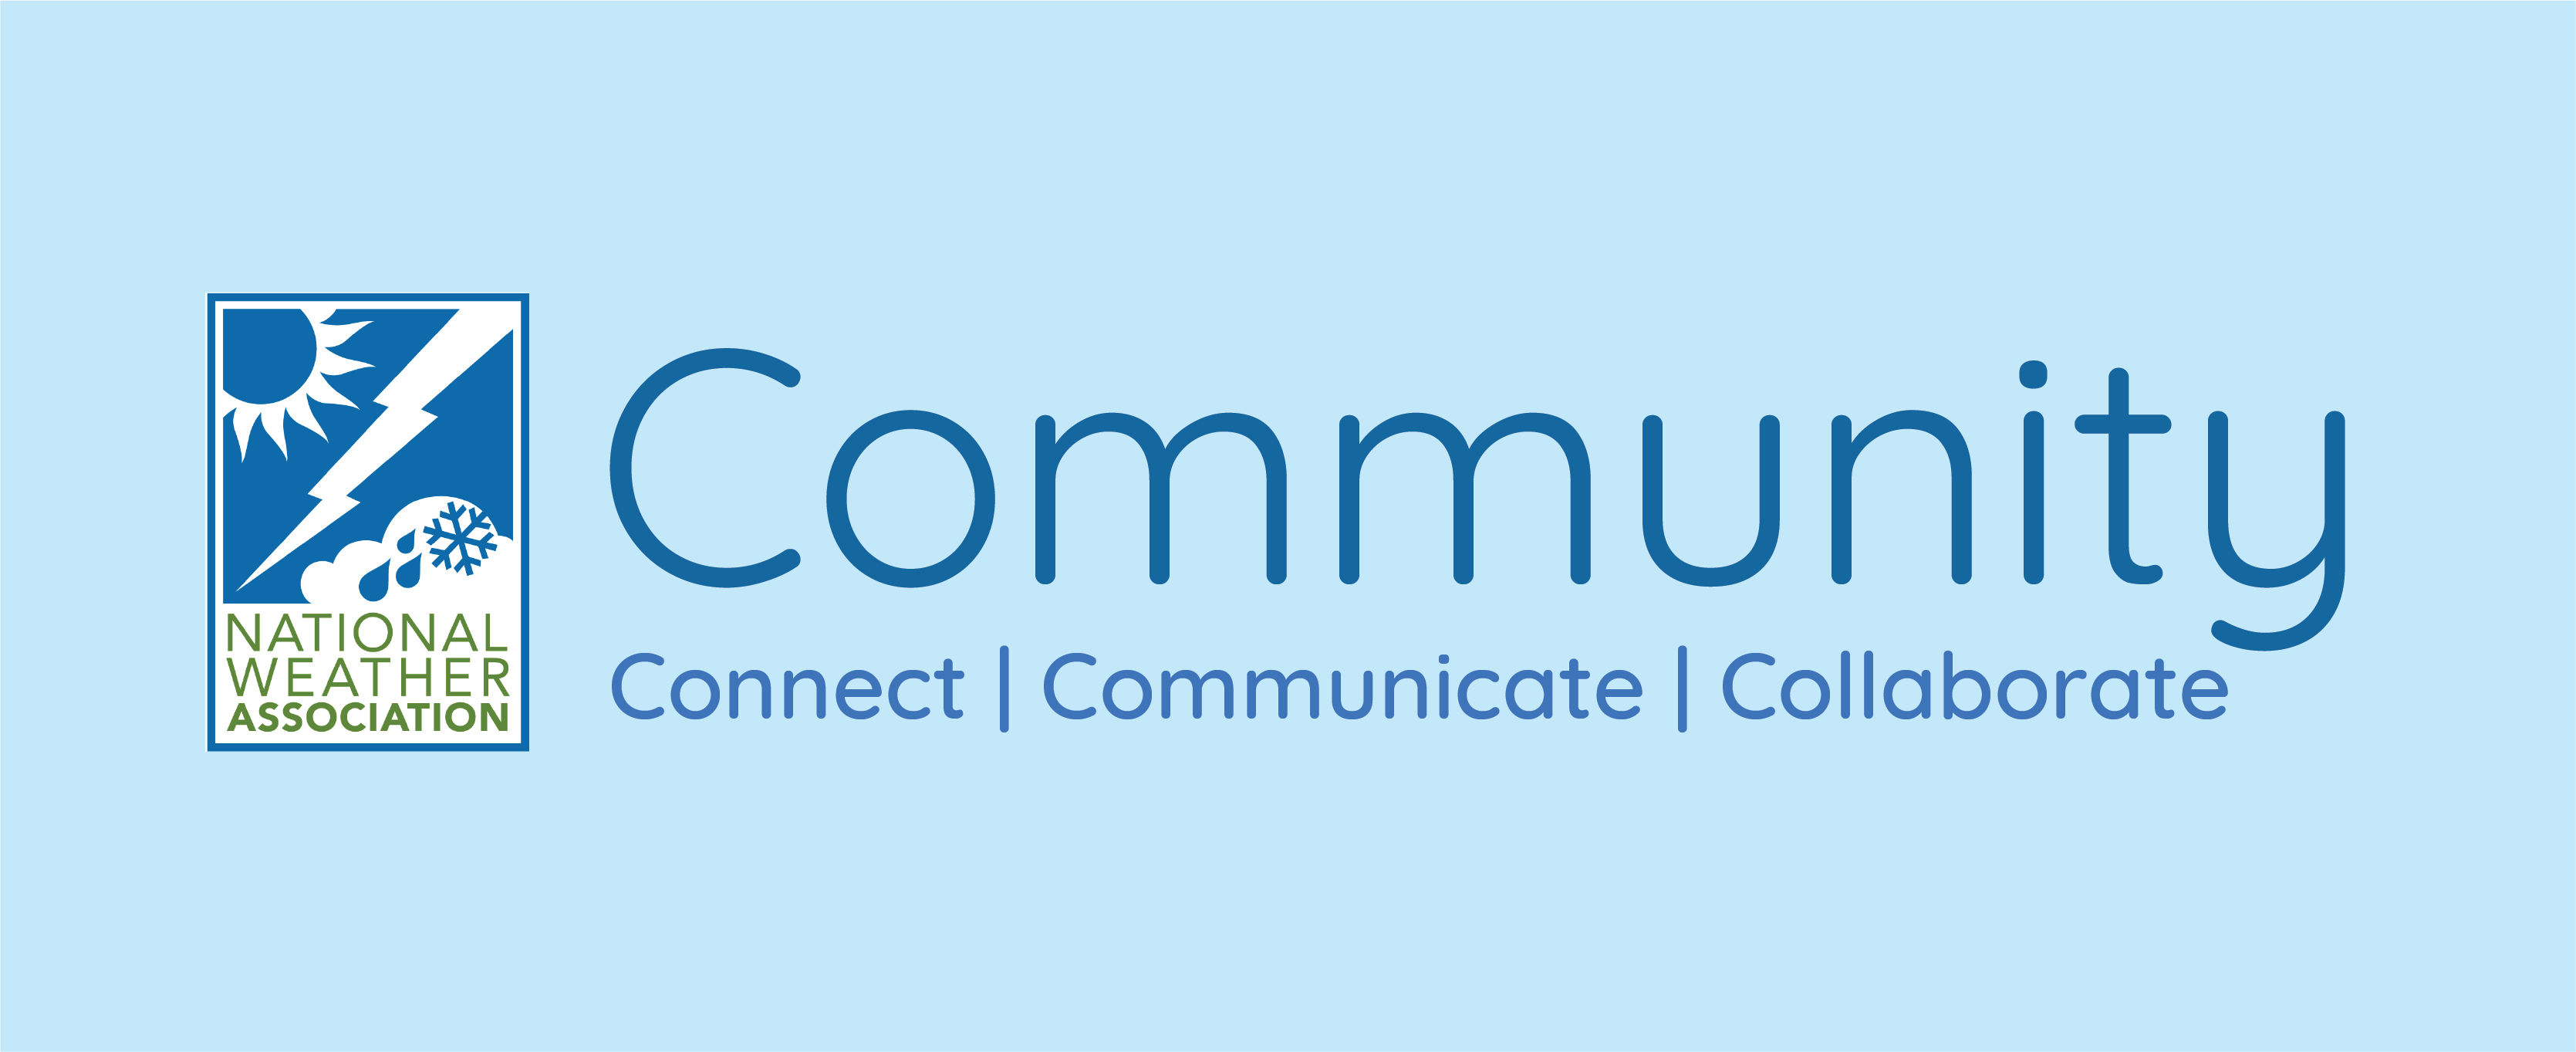 Community: Connect. Communicate. Collaborate.